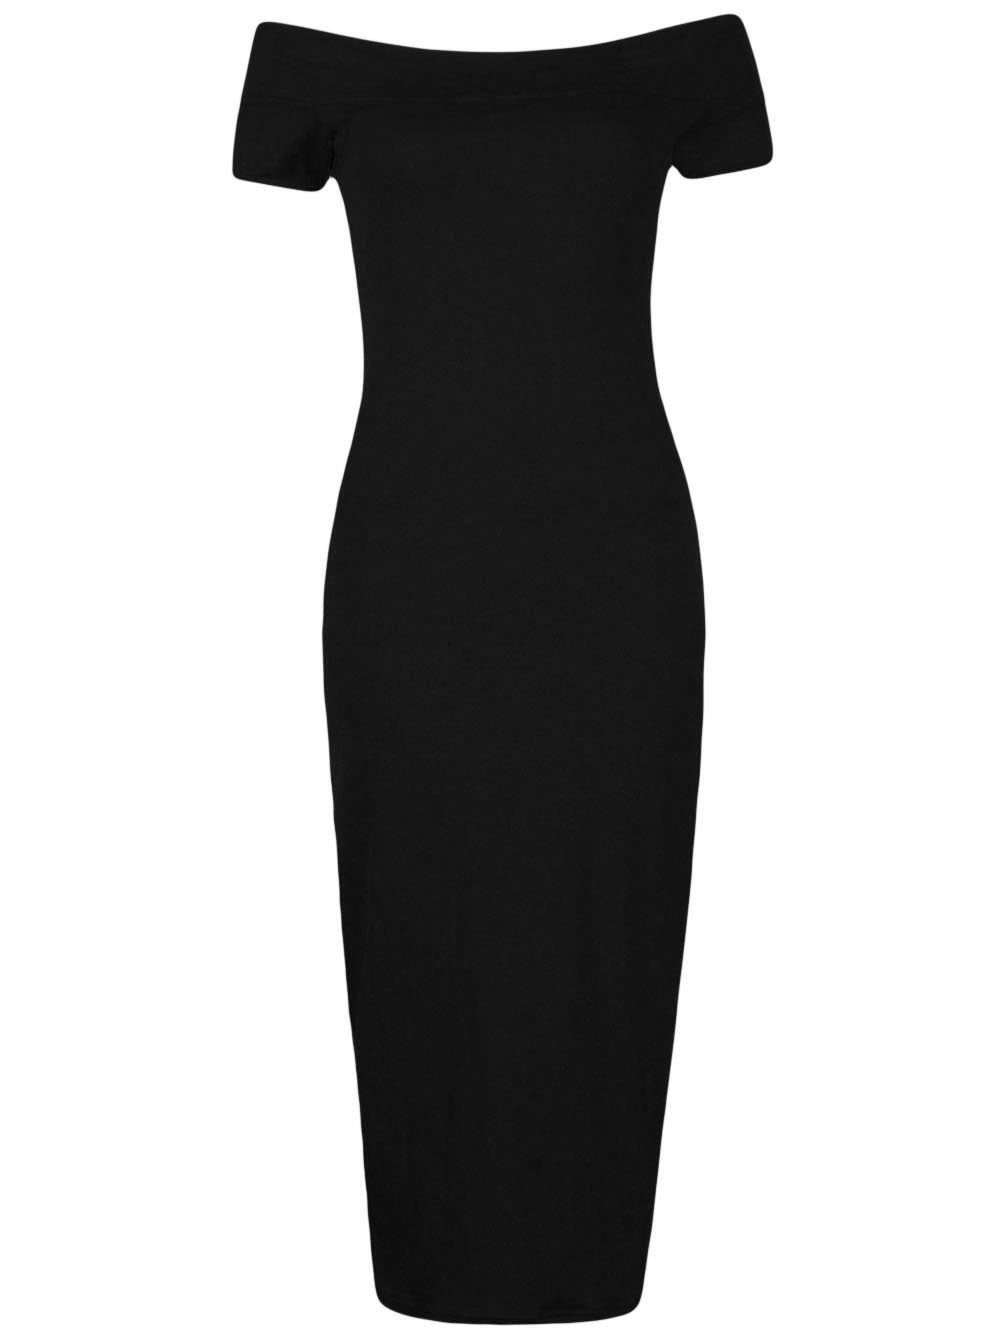 Bodycon Midi Dress Picture Collection | Dressed Up Girl